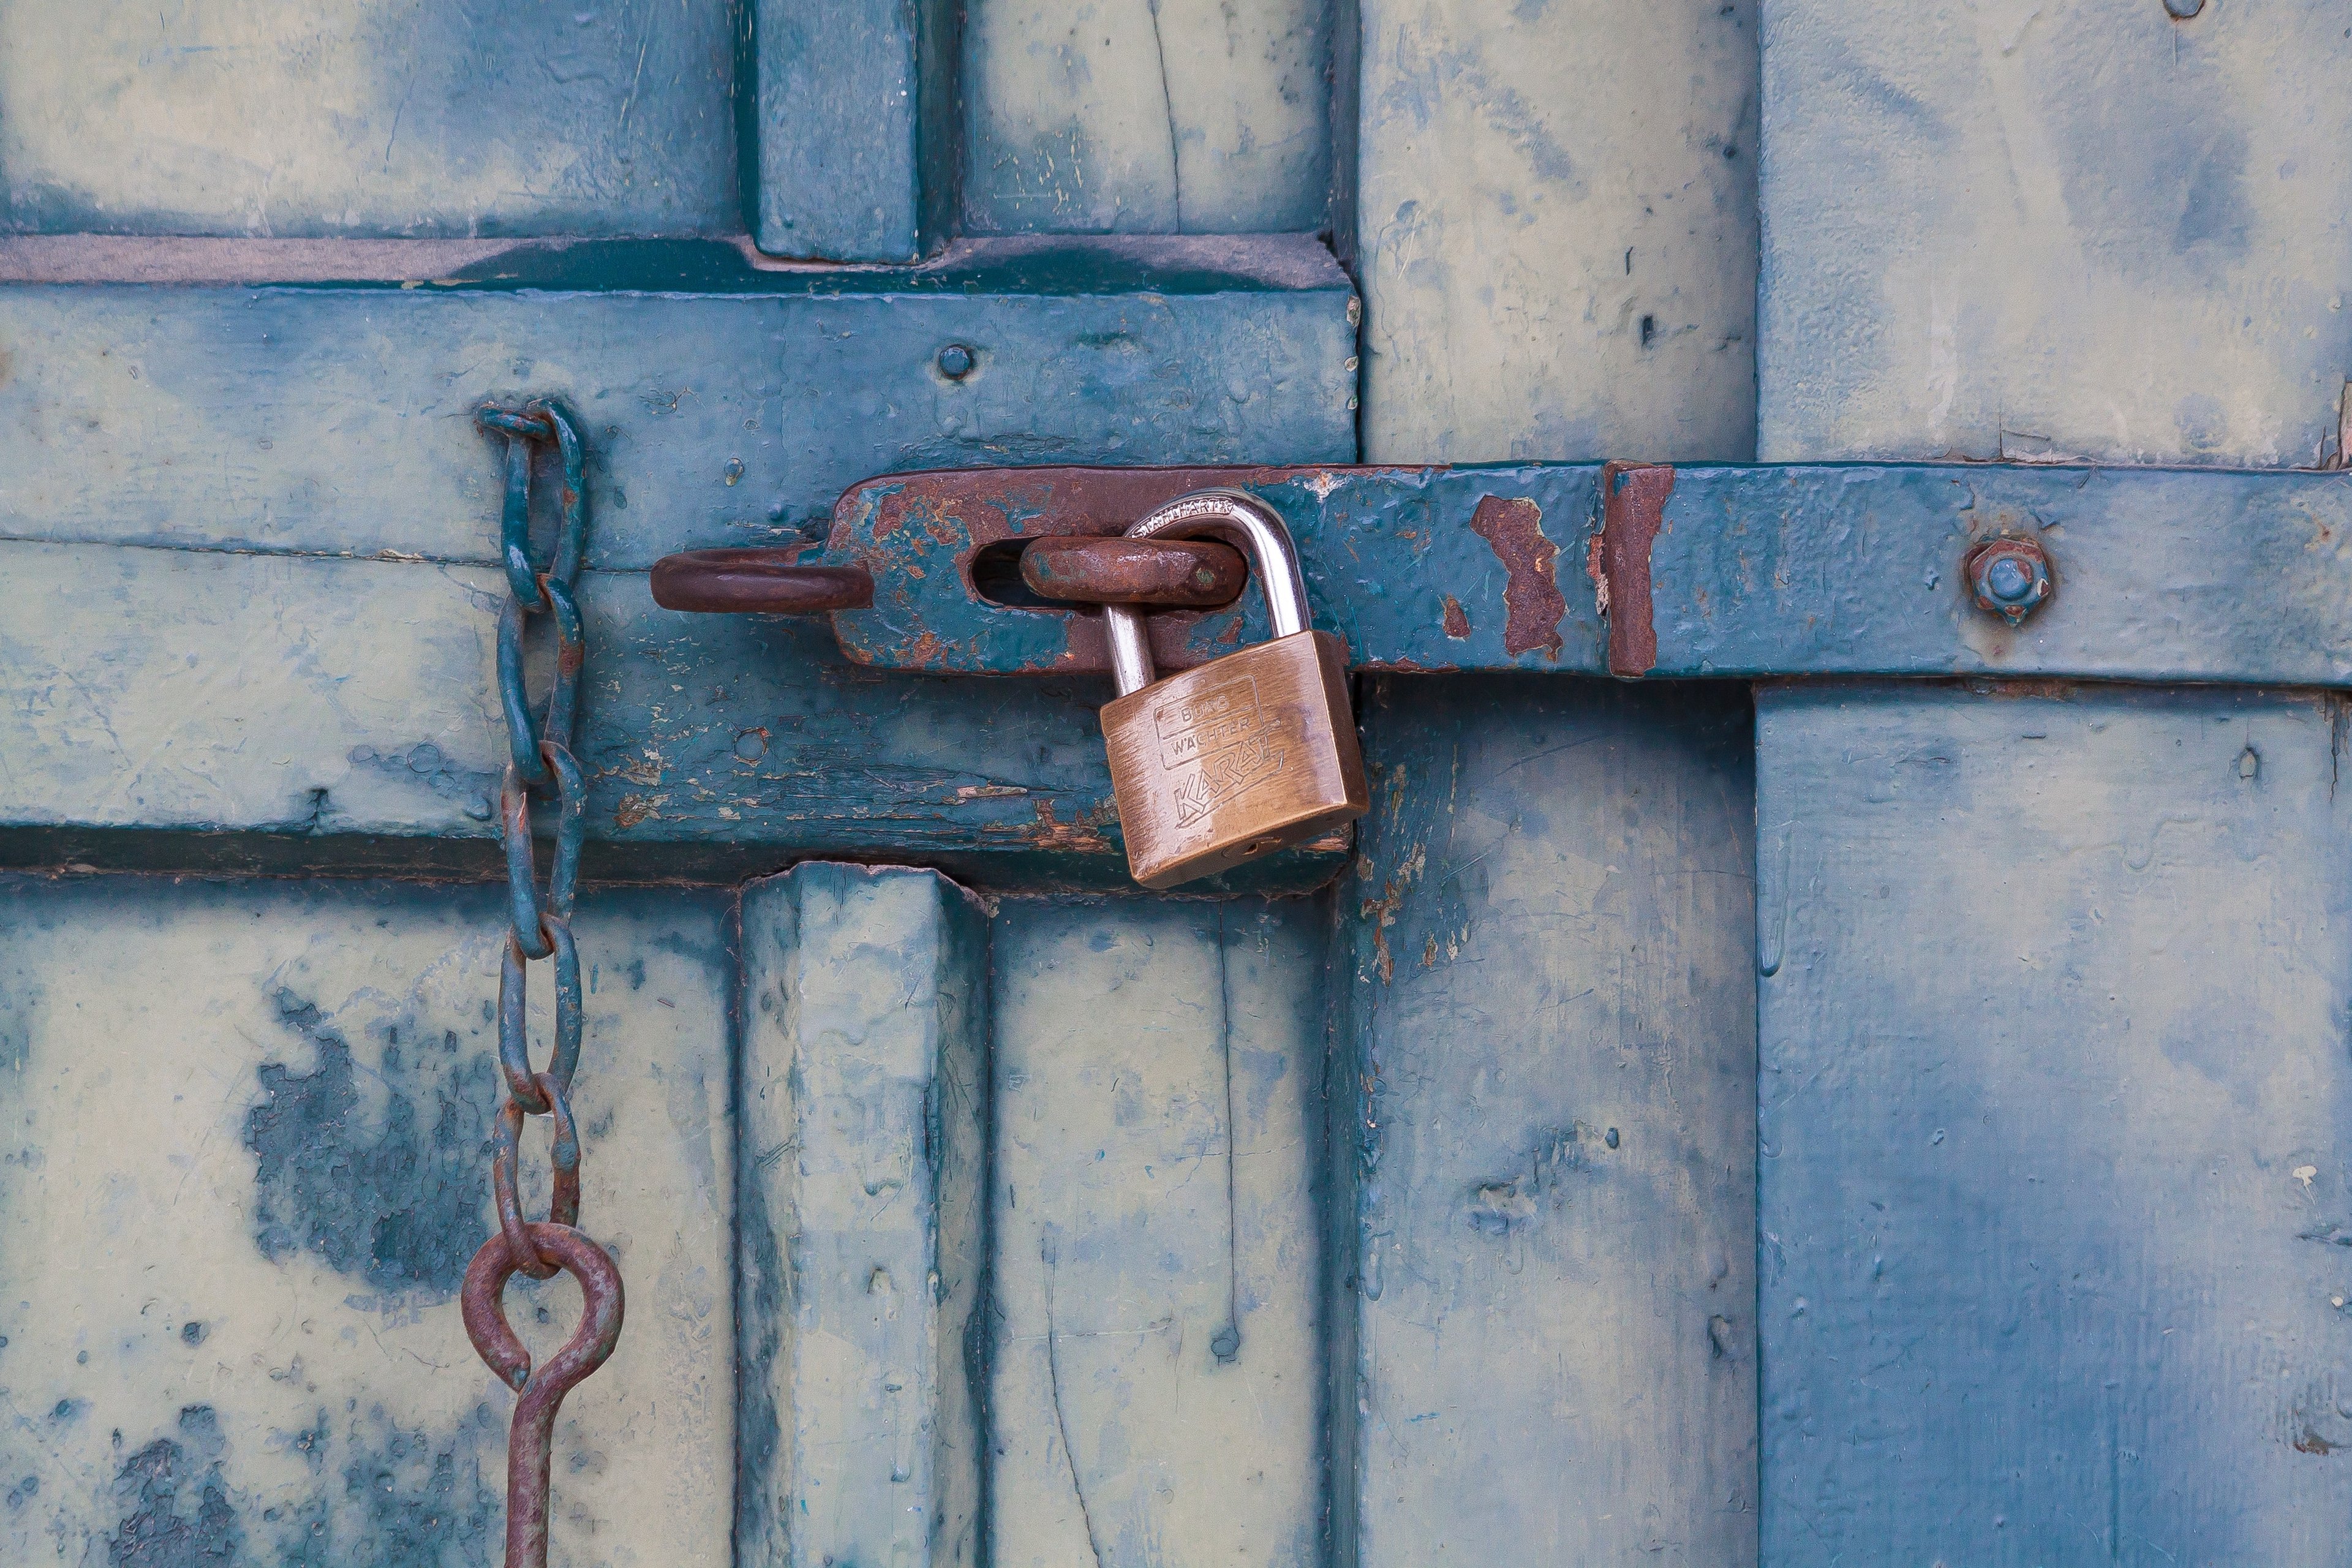 The best way to share photos online privately | Photo by Pixabay: https://www.pexels.com/photo/gold-padlock-locking-door-164425/